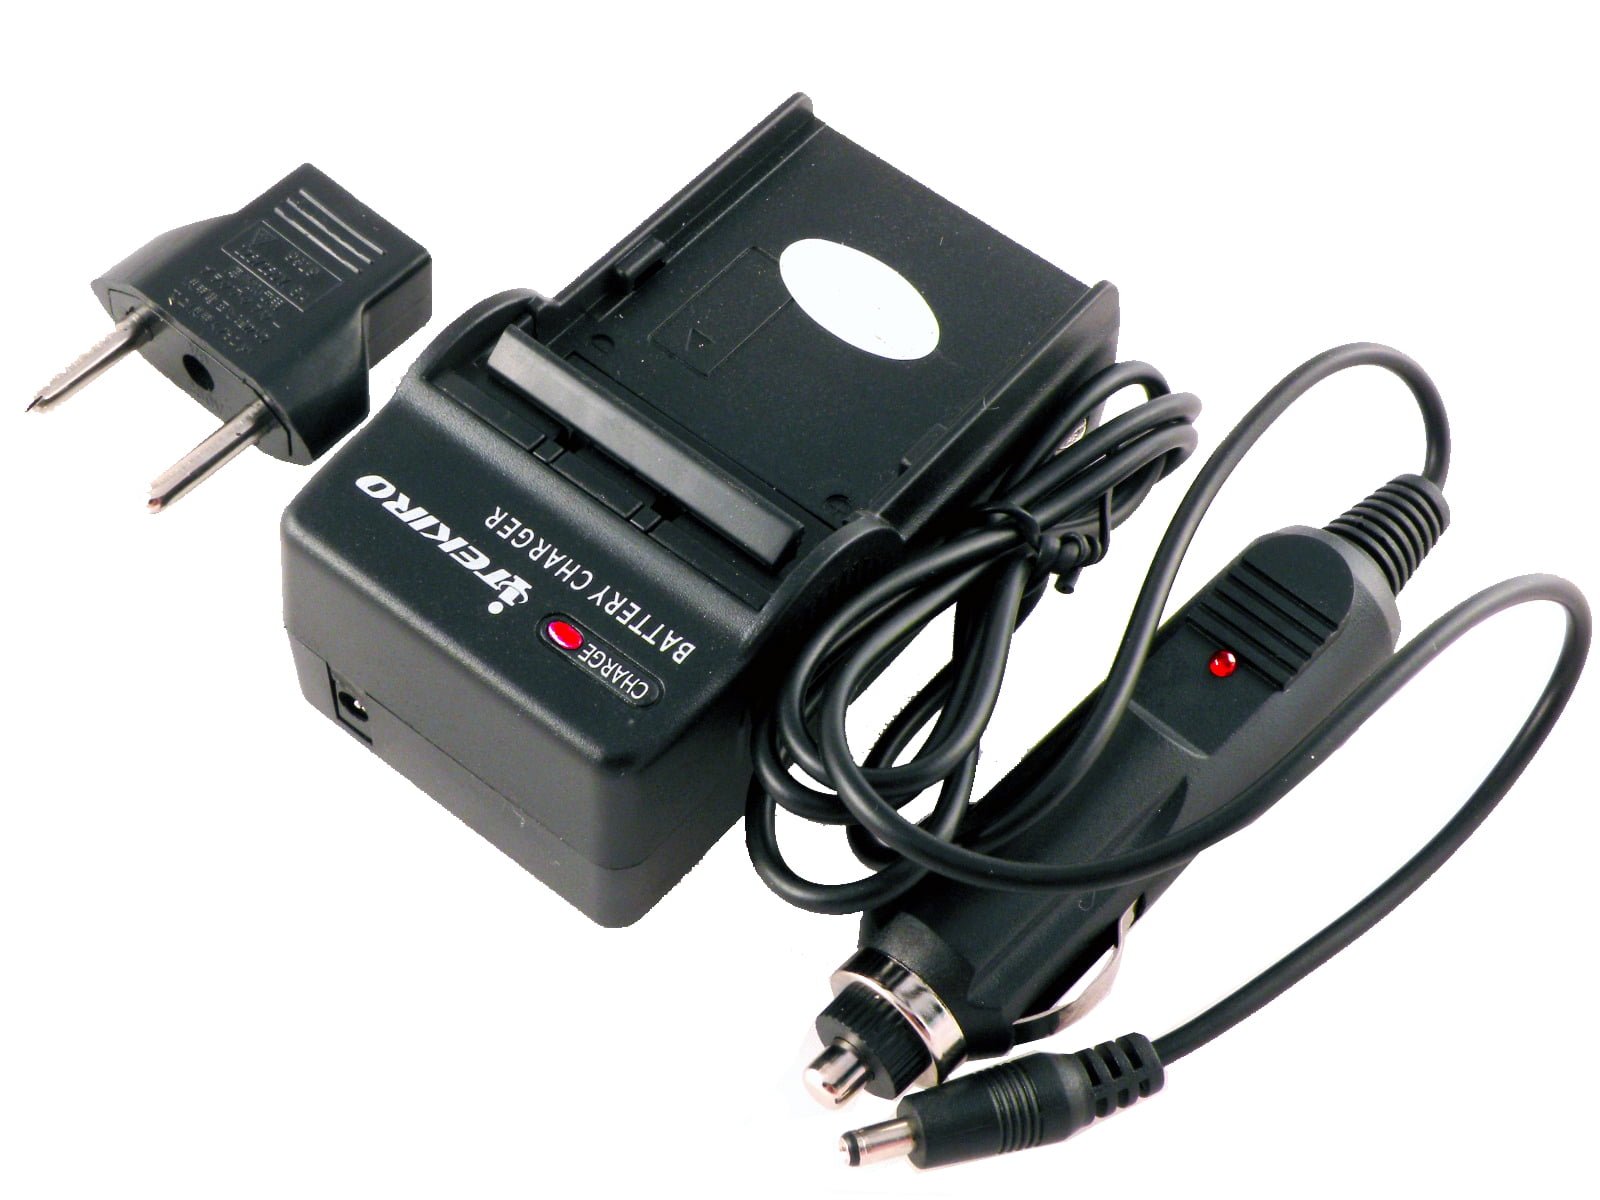 Battery Pack and LCD USB Travel Charger for Samsung SC-D303 SC-D307 Digital Video Camcorder SC-D305